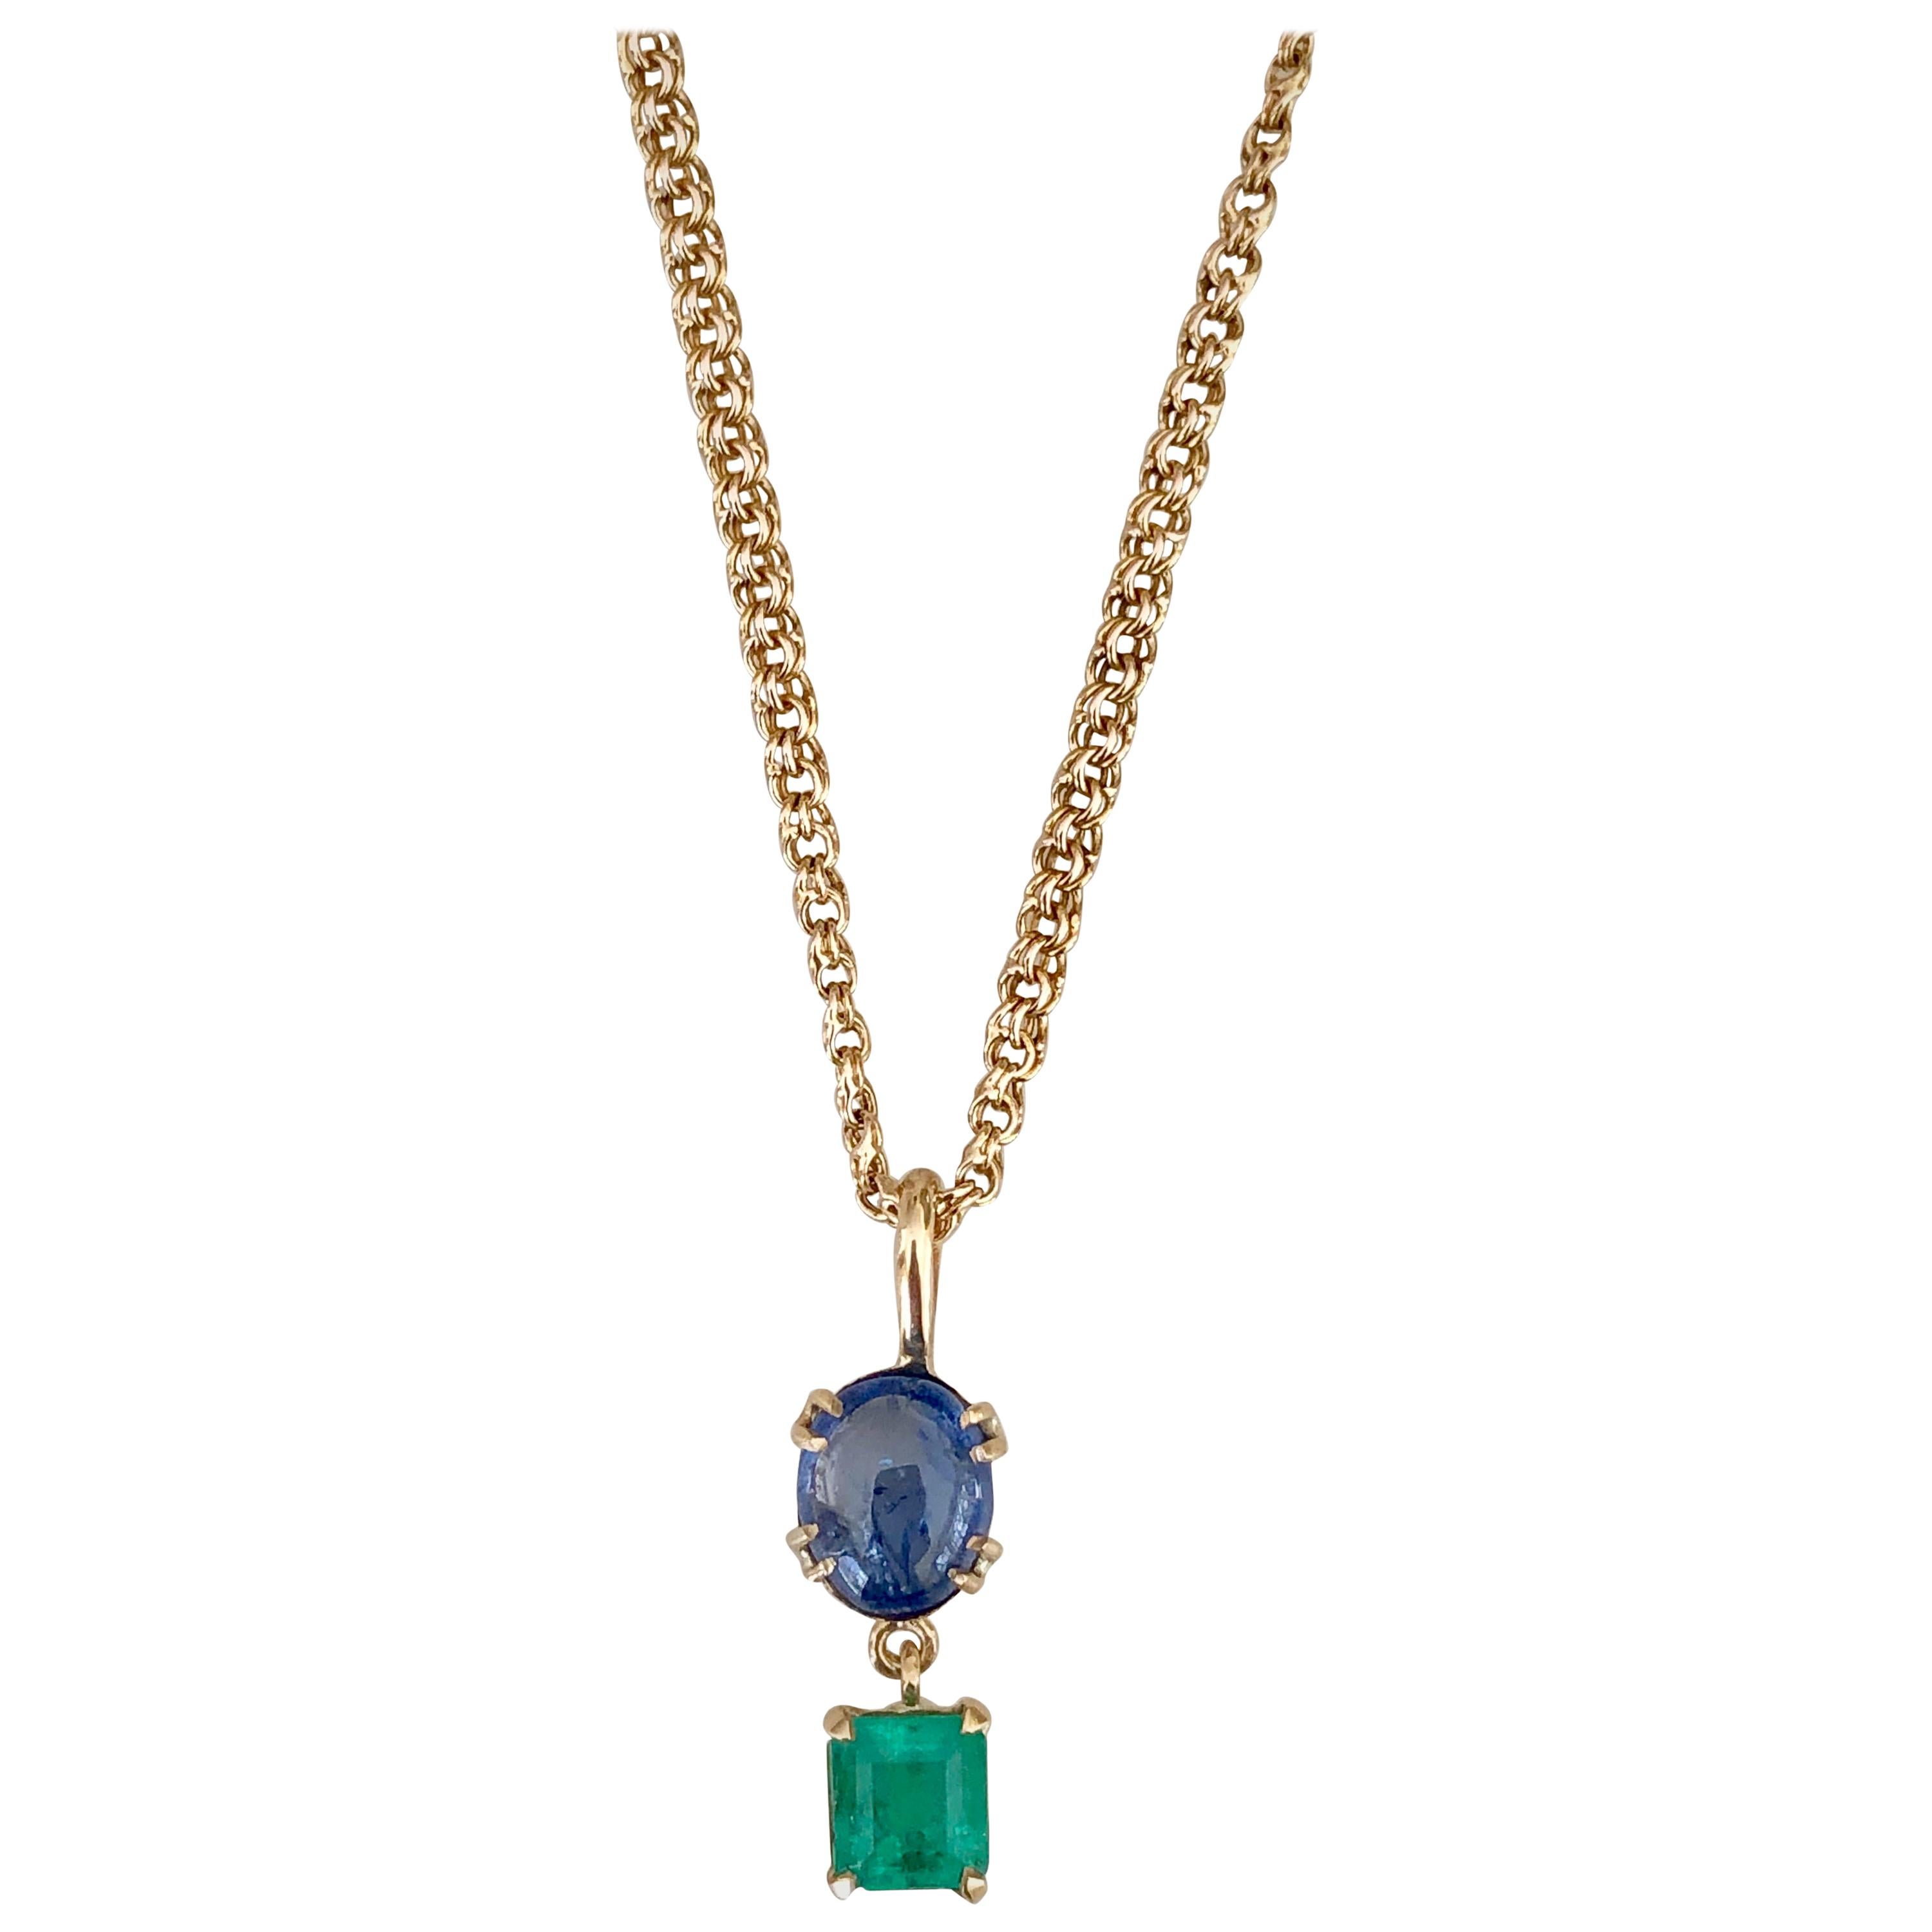 Gorgeous Vintage Pendant Drop Necklace. Natural untreated 4.40 carat Burmese vibrant cornflower blue color sapphire cabochon with emerald cut Colombian emerald approx 1.80 carat, set in 18k yellow gold. The pendant is accompany by a 18.5